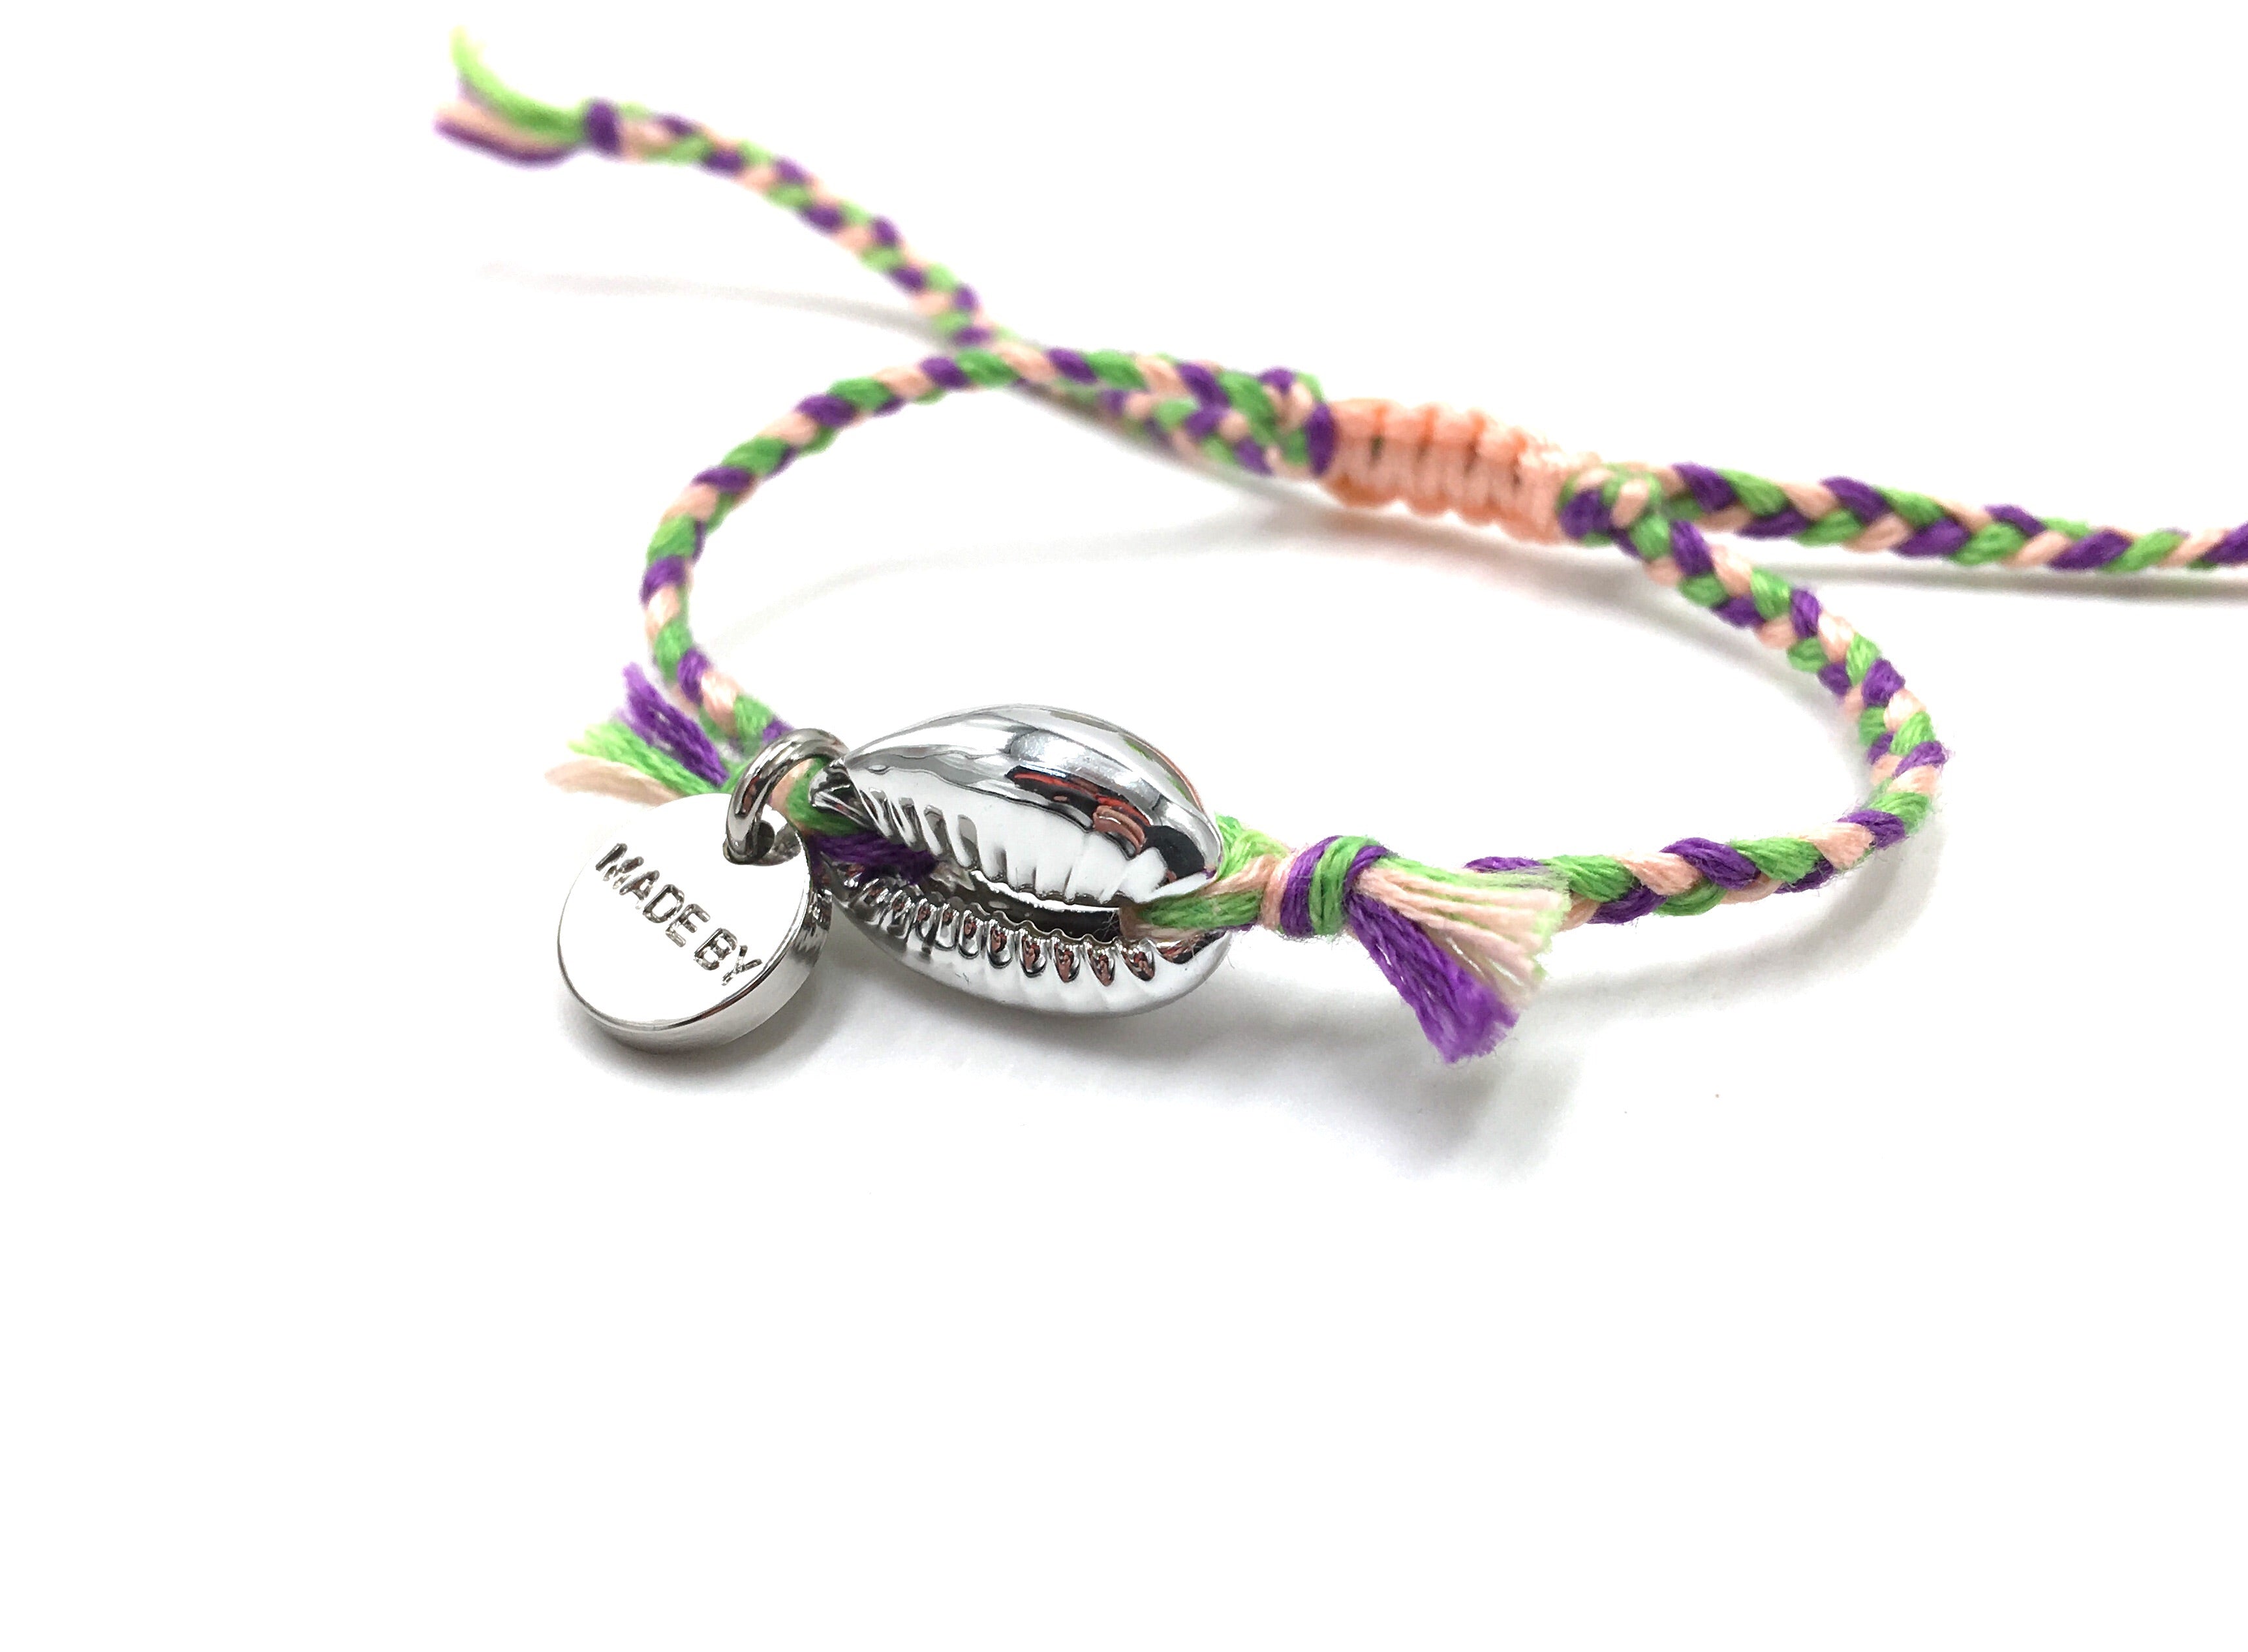 Silver shell bracelet, light pink, purple and grass green ‘cotton perlé’ braided cord